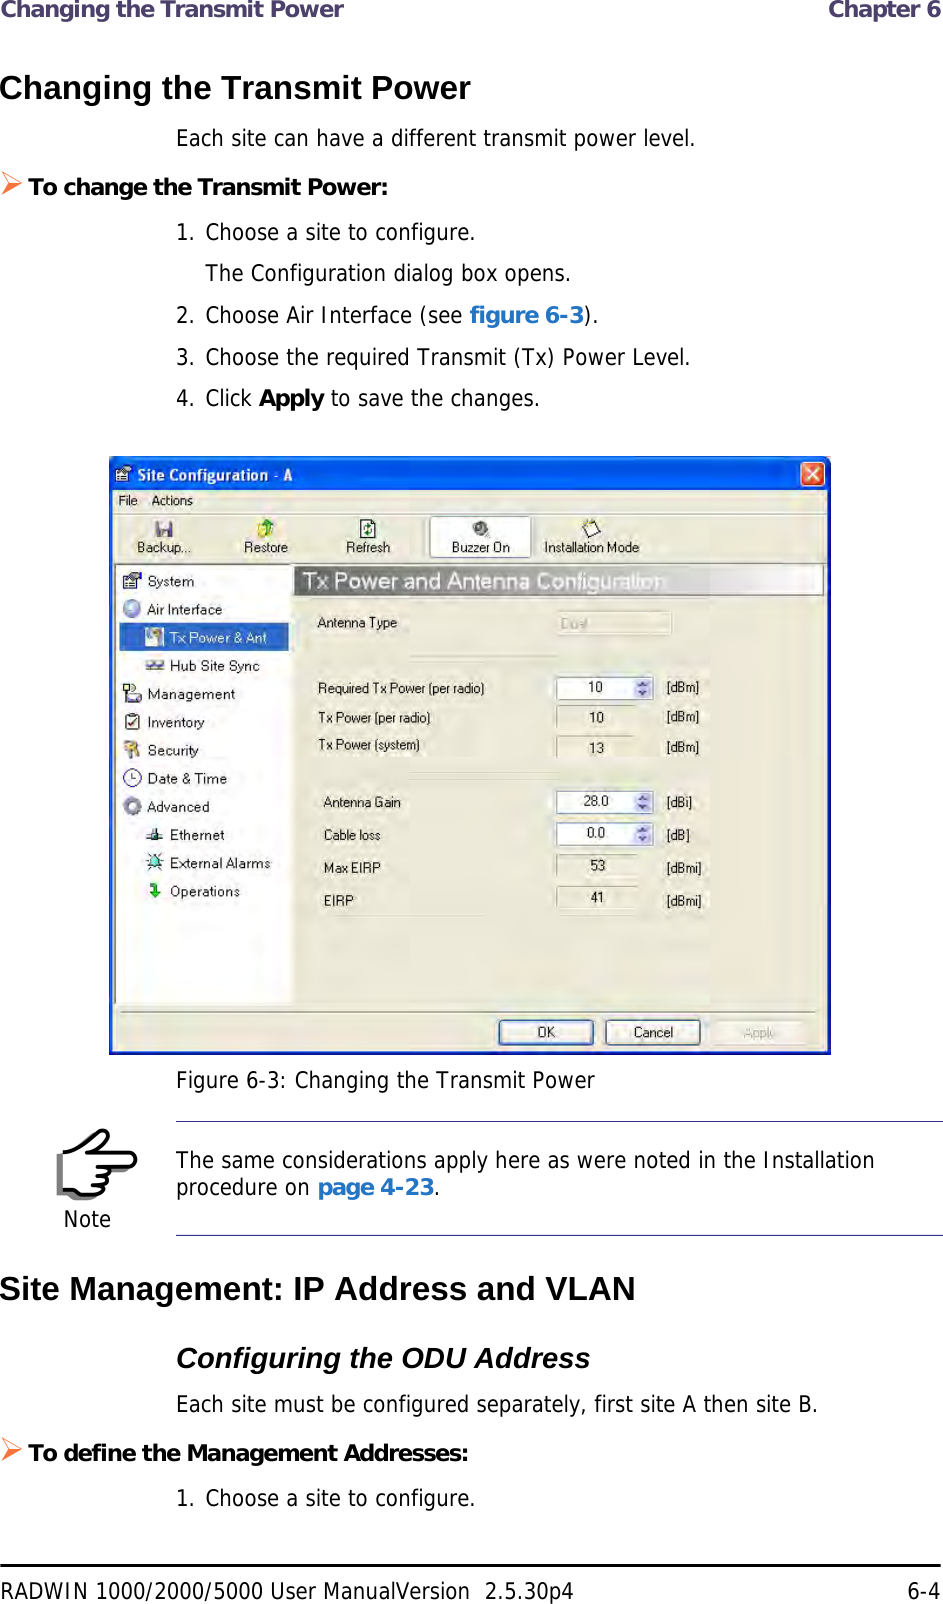 Changing the Transmit Power  Chapter 6RADWIN 1000/2000/5000 User ManualVersion  2.5.30p4 6-4Changing the Transmit PowerEach site can have a different transmit power level. To change the Transmit Power:1. Choose a site to configure.The Configuration dialog box opens.2. Choose Air Interface (see figure 6-3).3. Choose the required Transmit (Tx) Power Level.4. Click Apply to save the changes.Figure 6-3: Changing the Transmit PowerSite Management: IP Address and VLANConfiguring the ODU AddressEach site must be configured separately, first site A then site B.To define the Management Addresses:1. Choose a site to configure.NoteThe same considerations apply here as were noted in the Installation procedure on page 4-23.